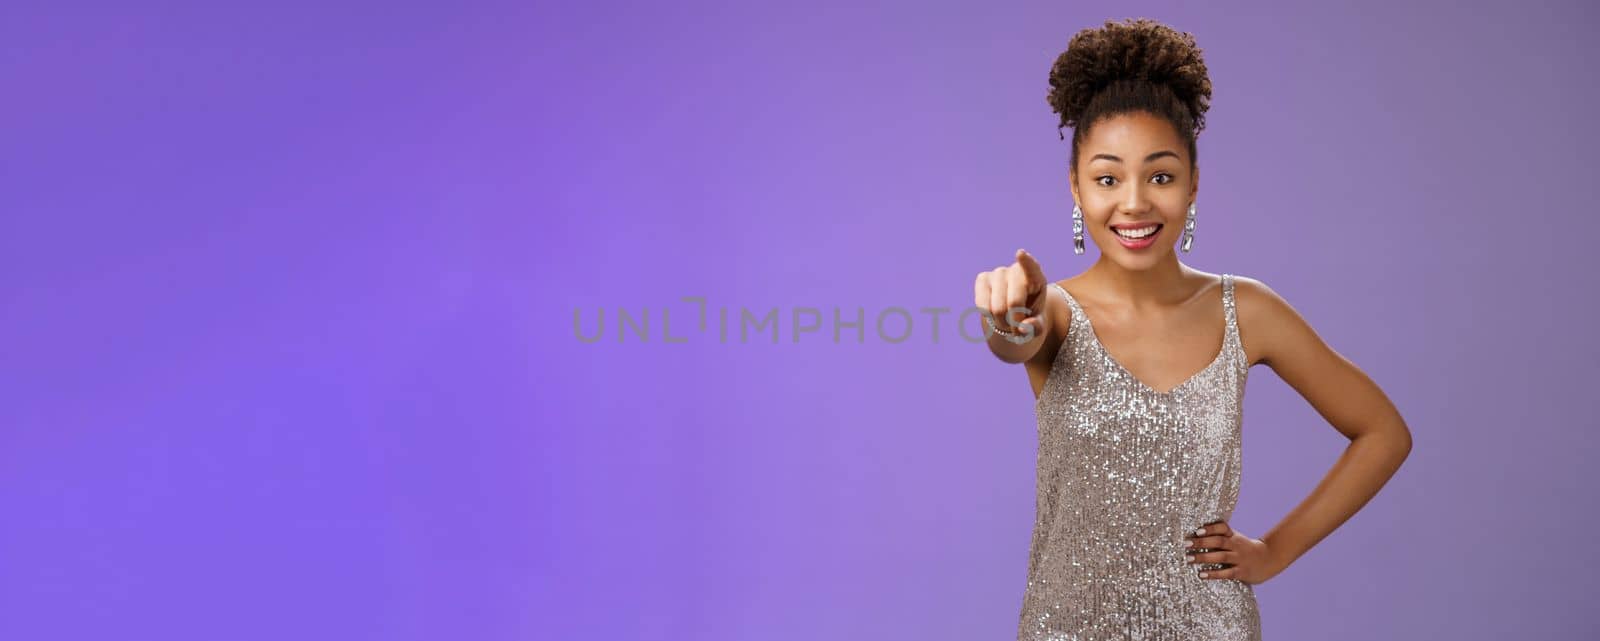 Joyful impressed african-american woman impolitely pointing camera indicating funny interesting person outfit smiling delighted staring thrilled joyful posing blue background. Copy space